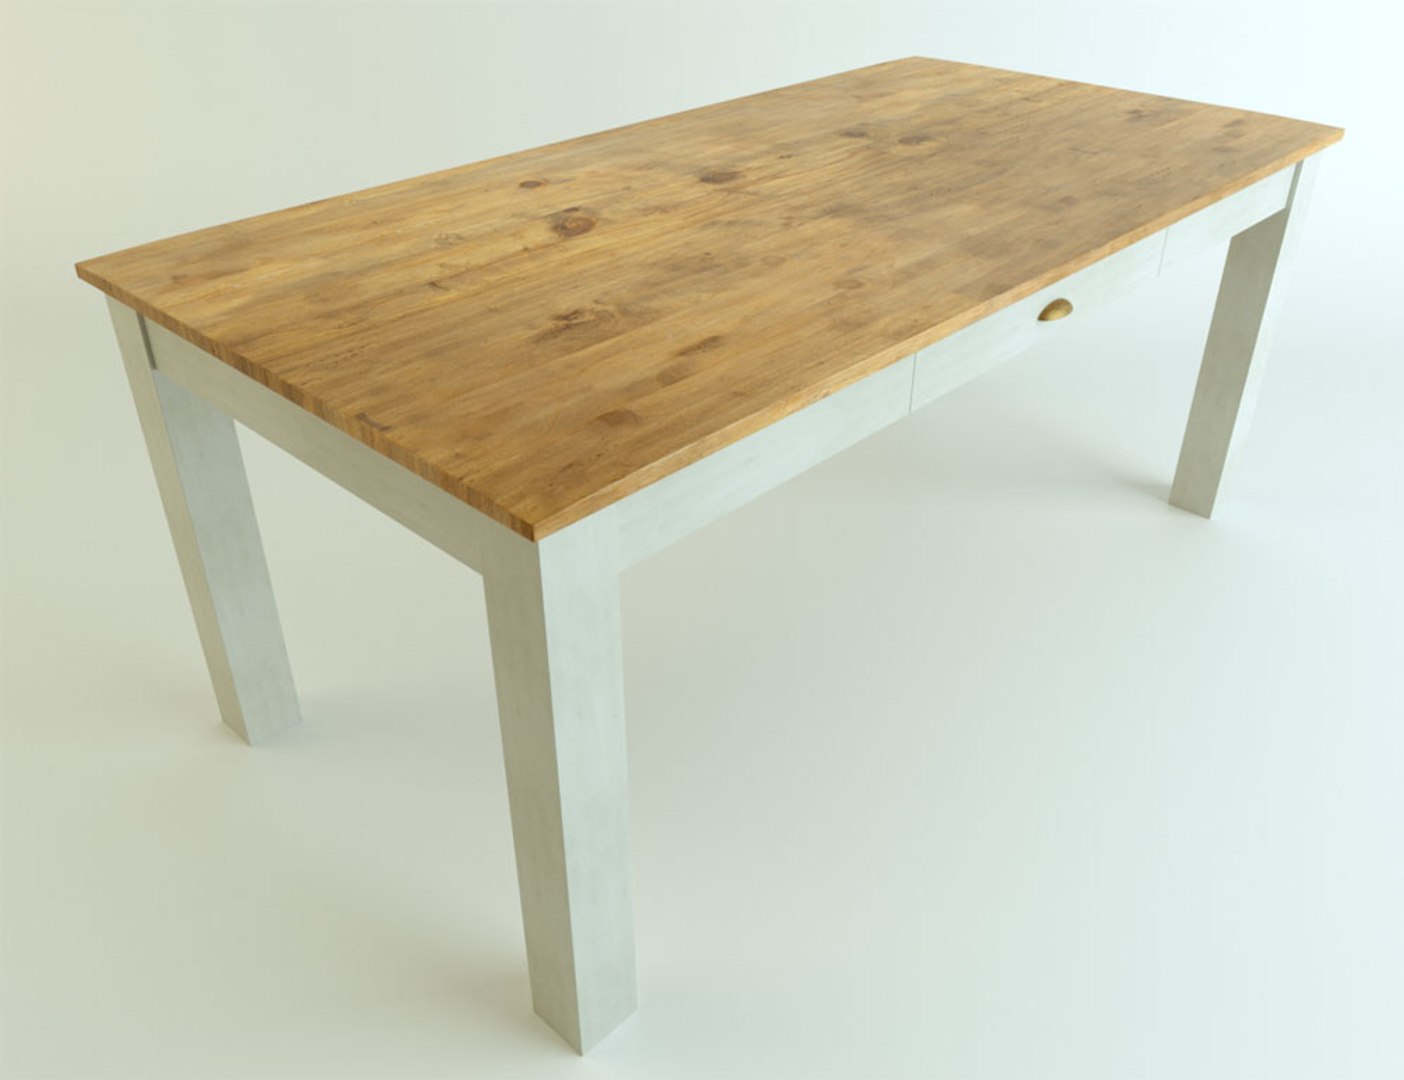 destressed table ued for a coffe tabe in kitchen